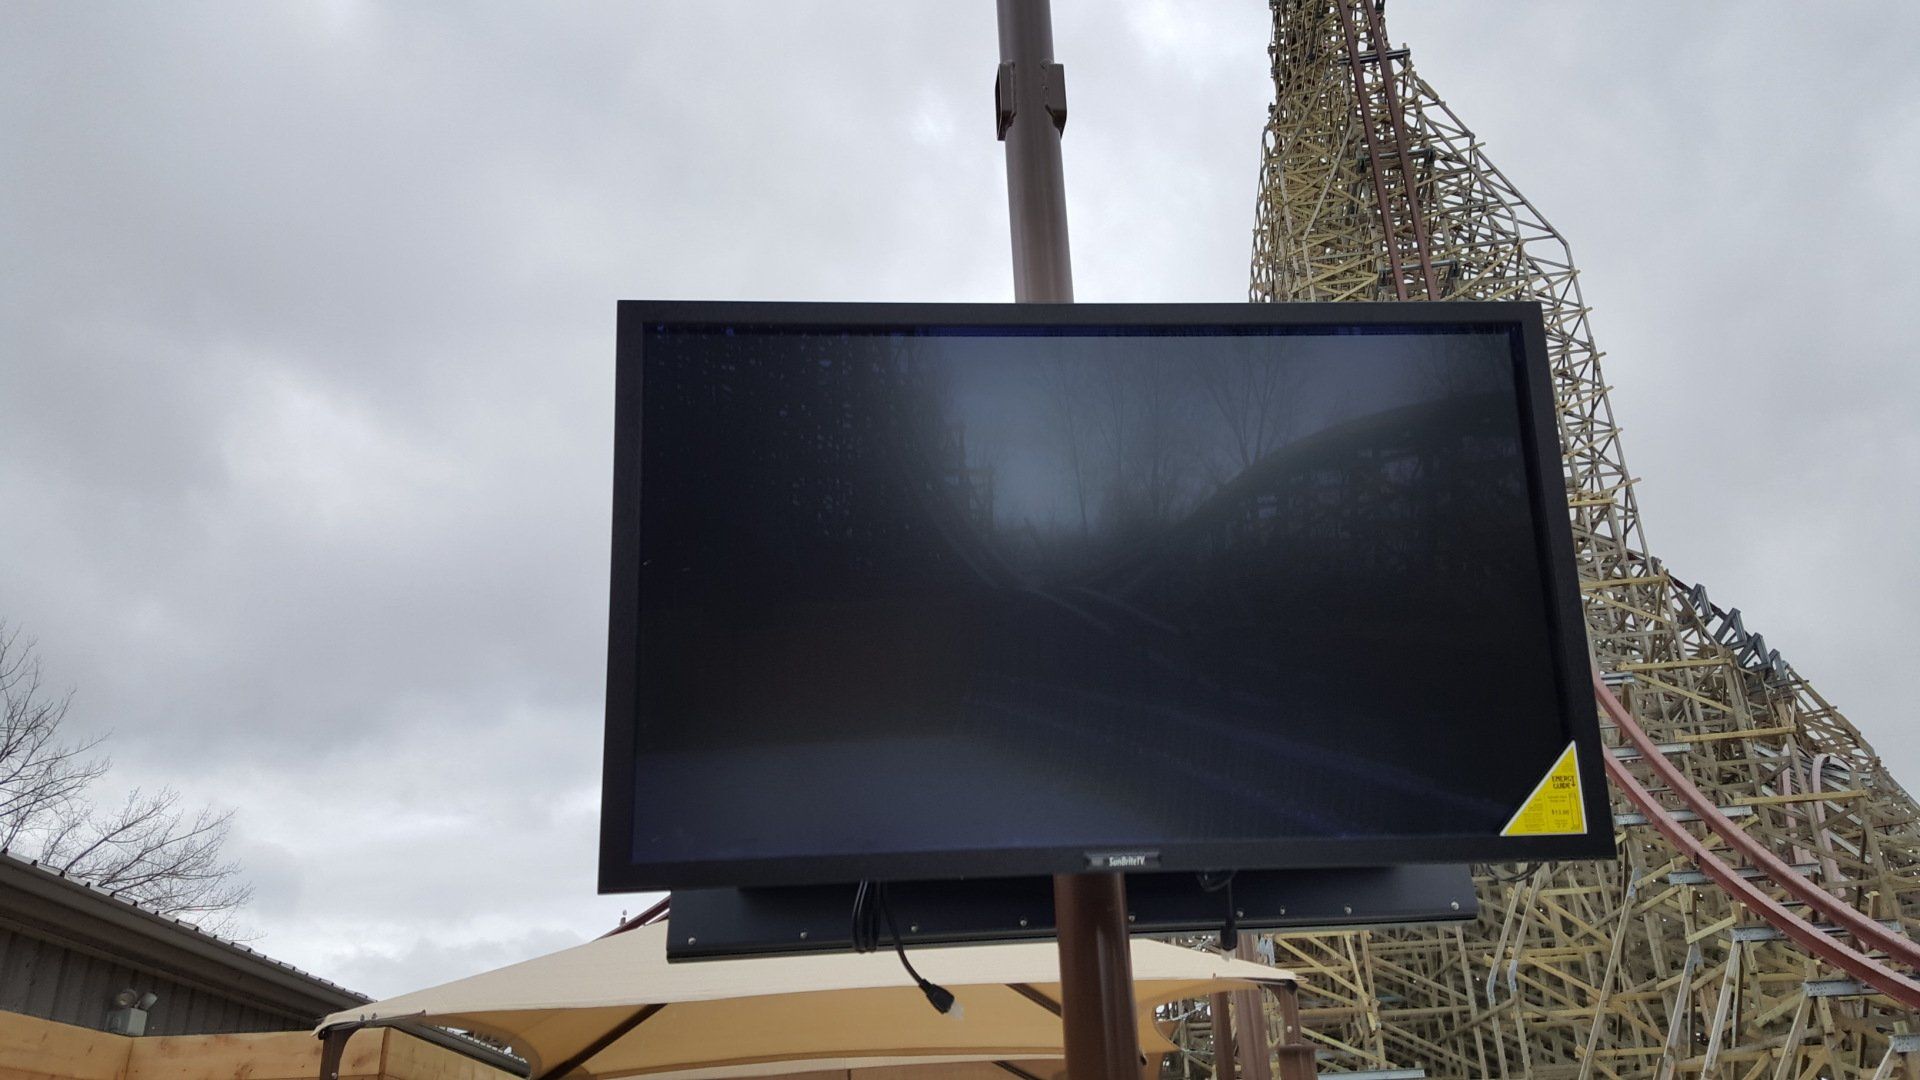 an outdoor tv at an amusement park in front of a roller coaster